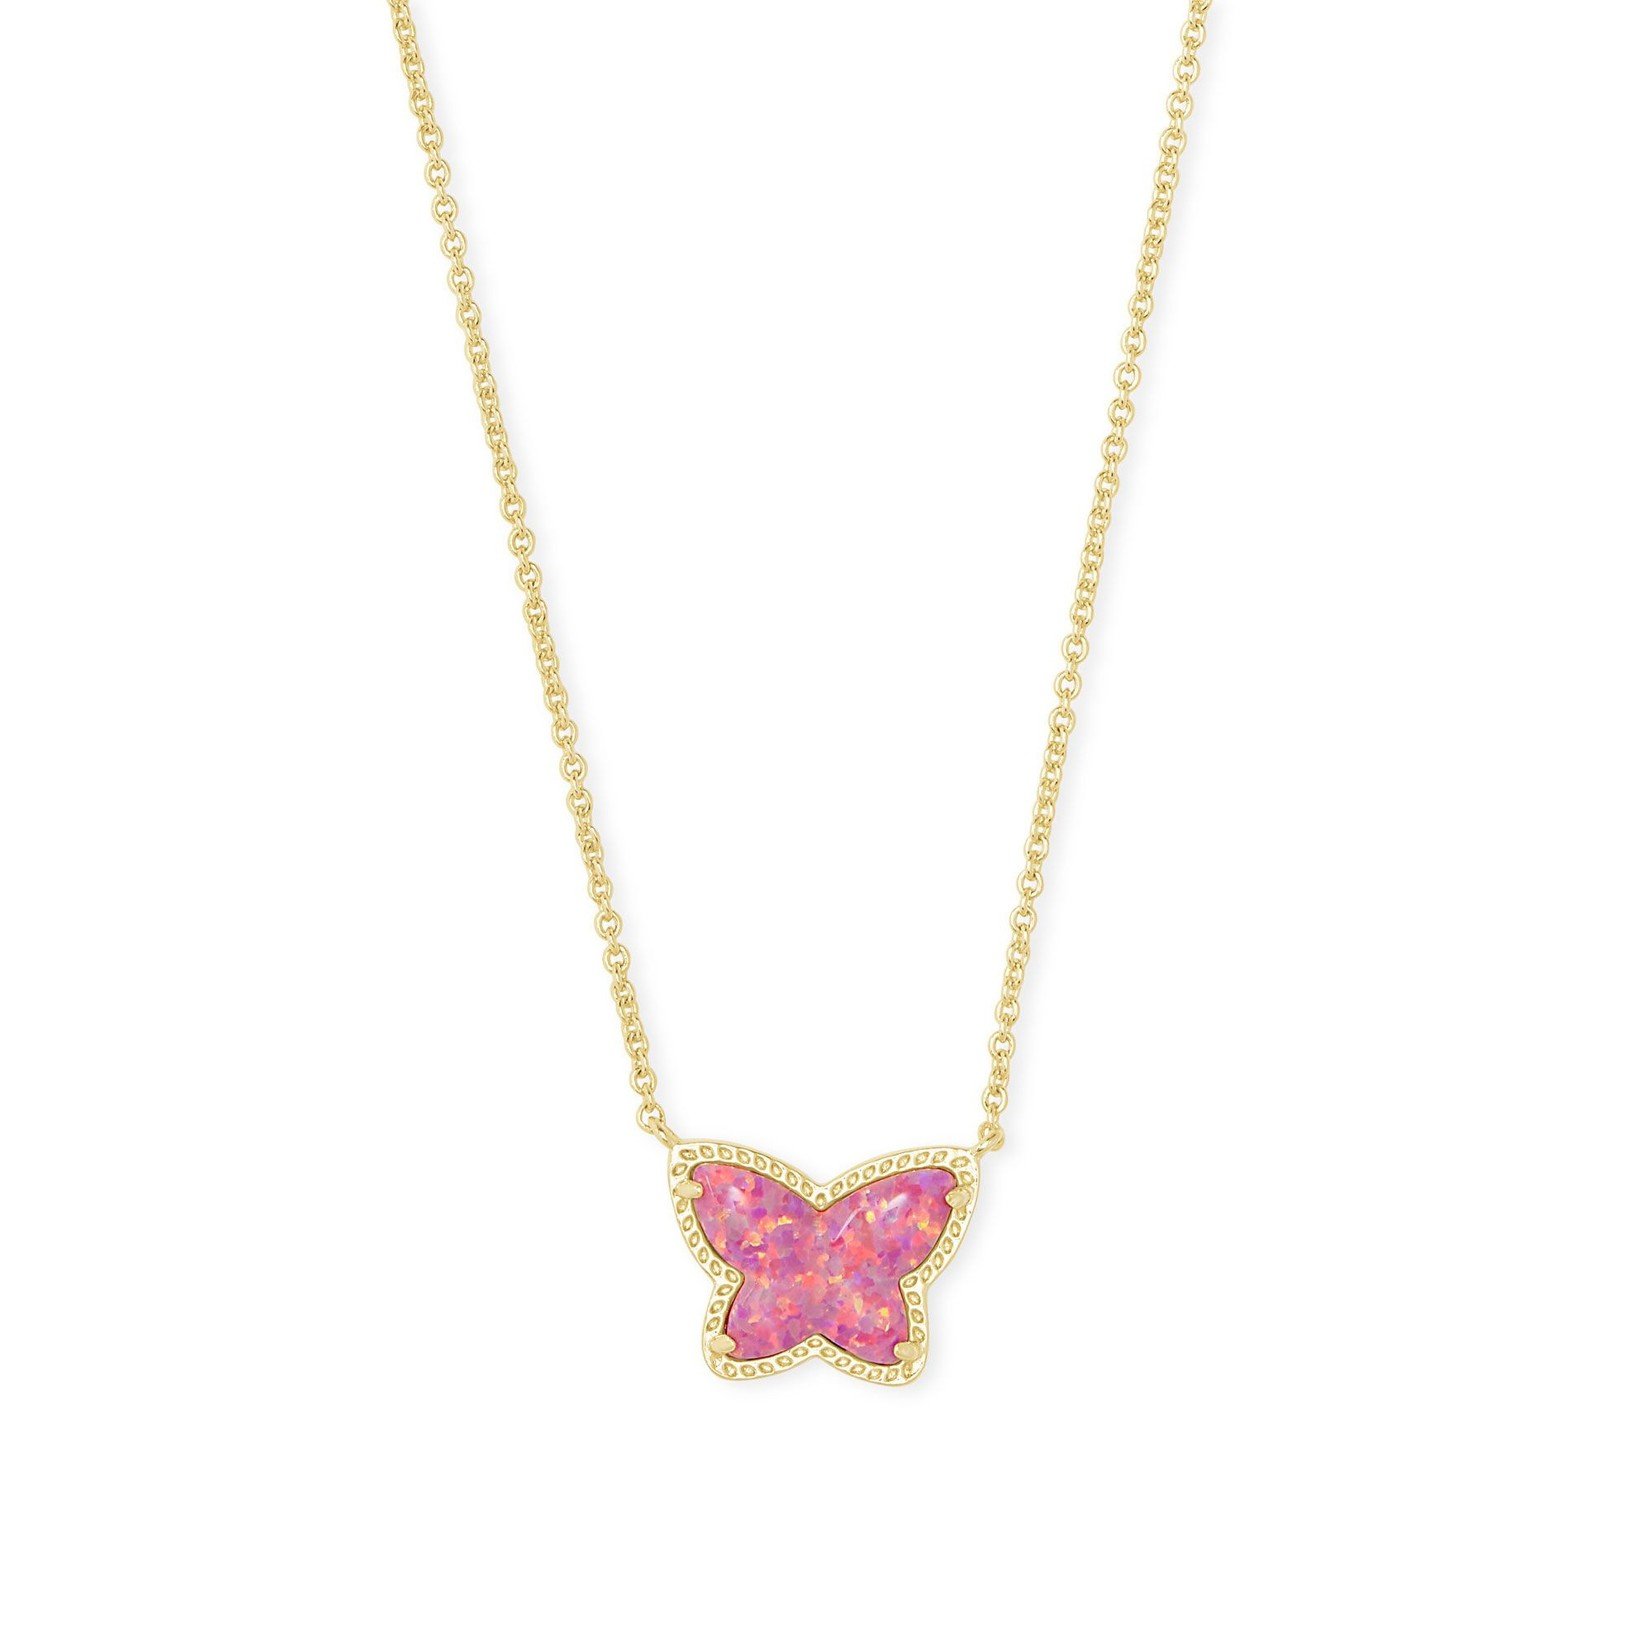 The Lillia Butterfly Pendant Necklace